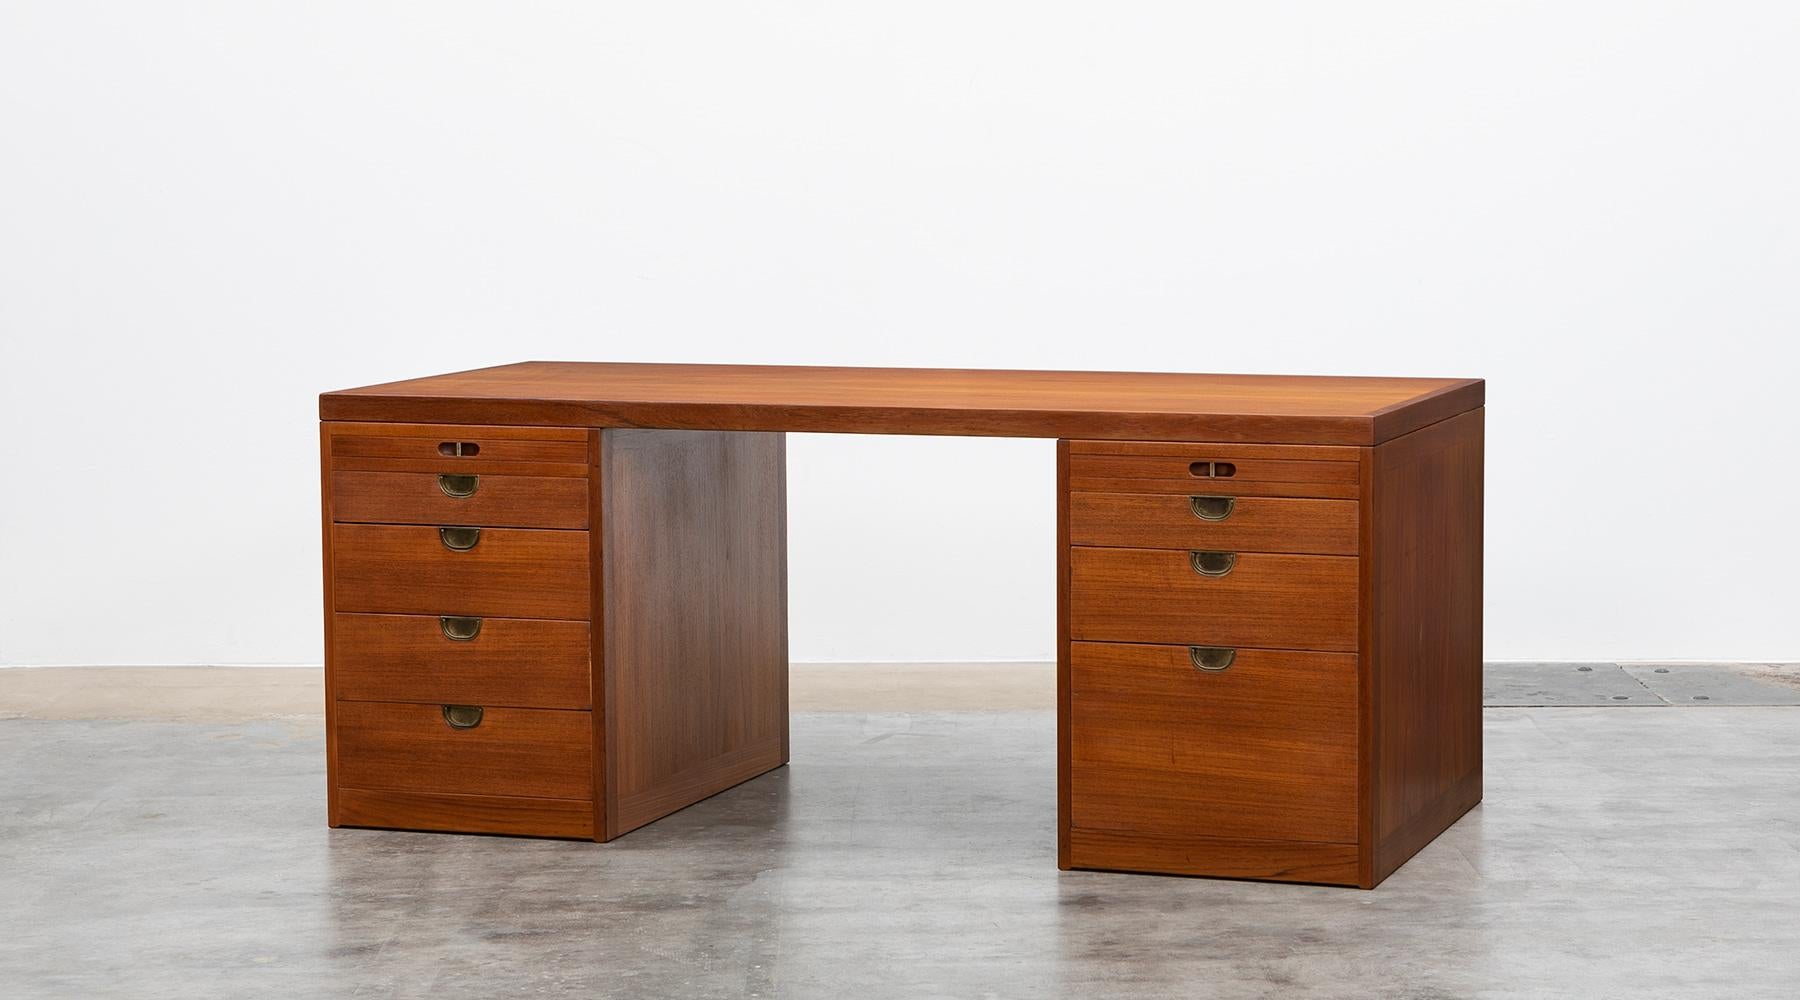 Desk by Børge Mogensen, teak and brass details, Denmark, 1950.

Bold and classic writing desk in teak designed by Borge Mogensen with a slim table top and nine drawers in different sizes for a lot of storage space. The grips are brass, the top is